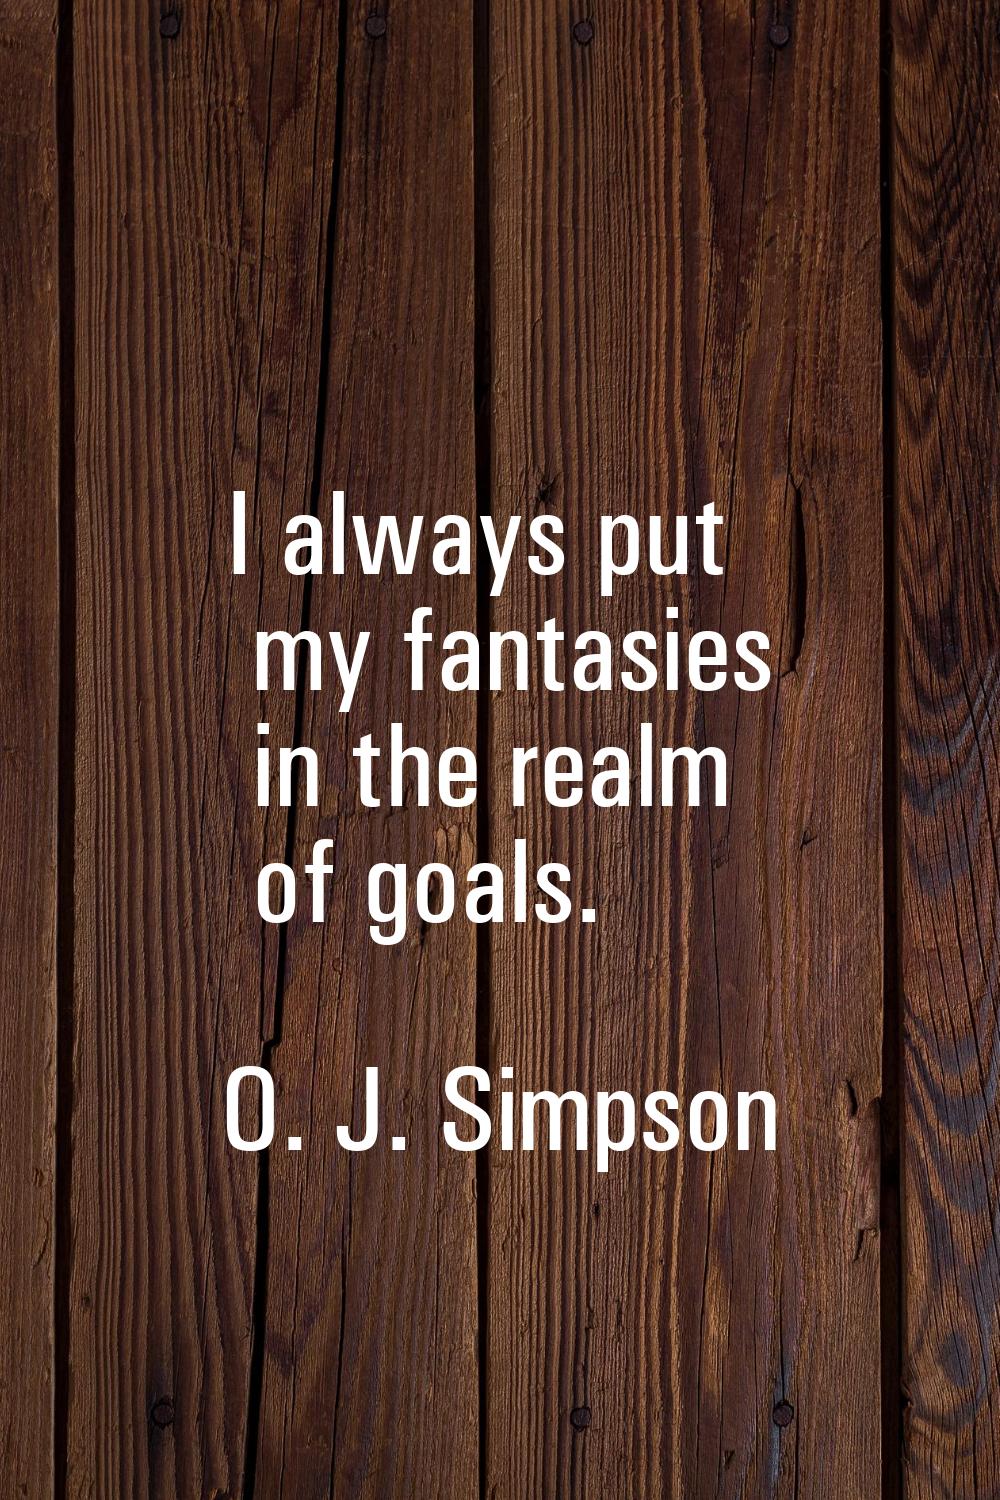 I always put my fantasies in the realm of goals.